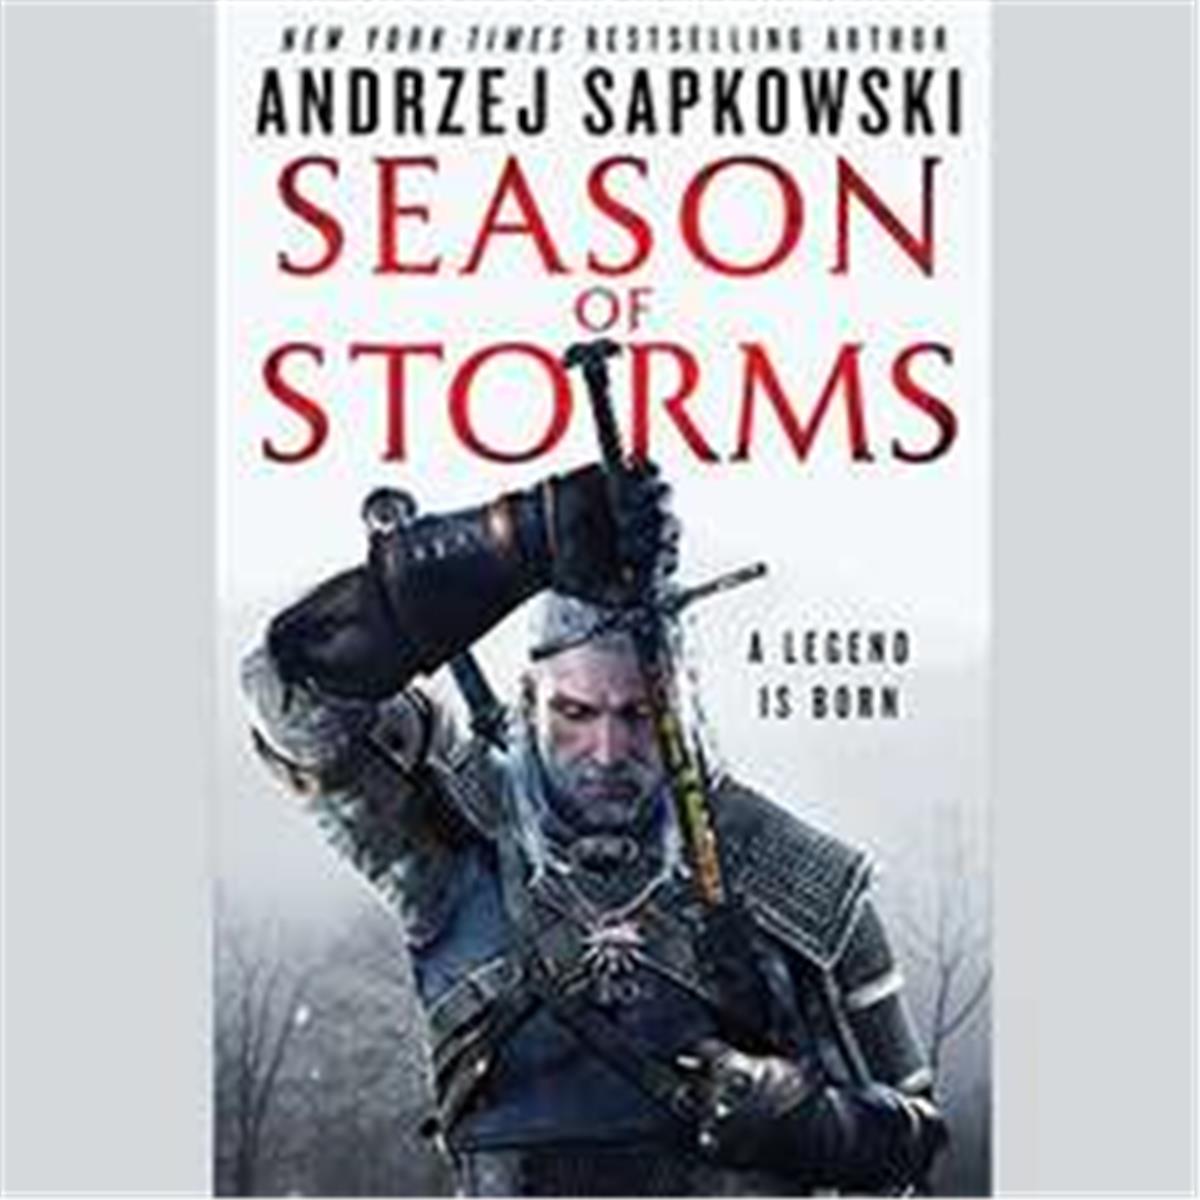 ISBN 9781549172250 product image for 9781549172250 Season of Storms Audio Book | upcitemdb.com